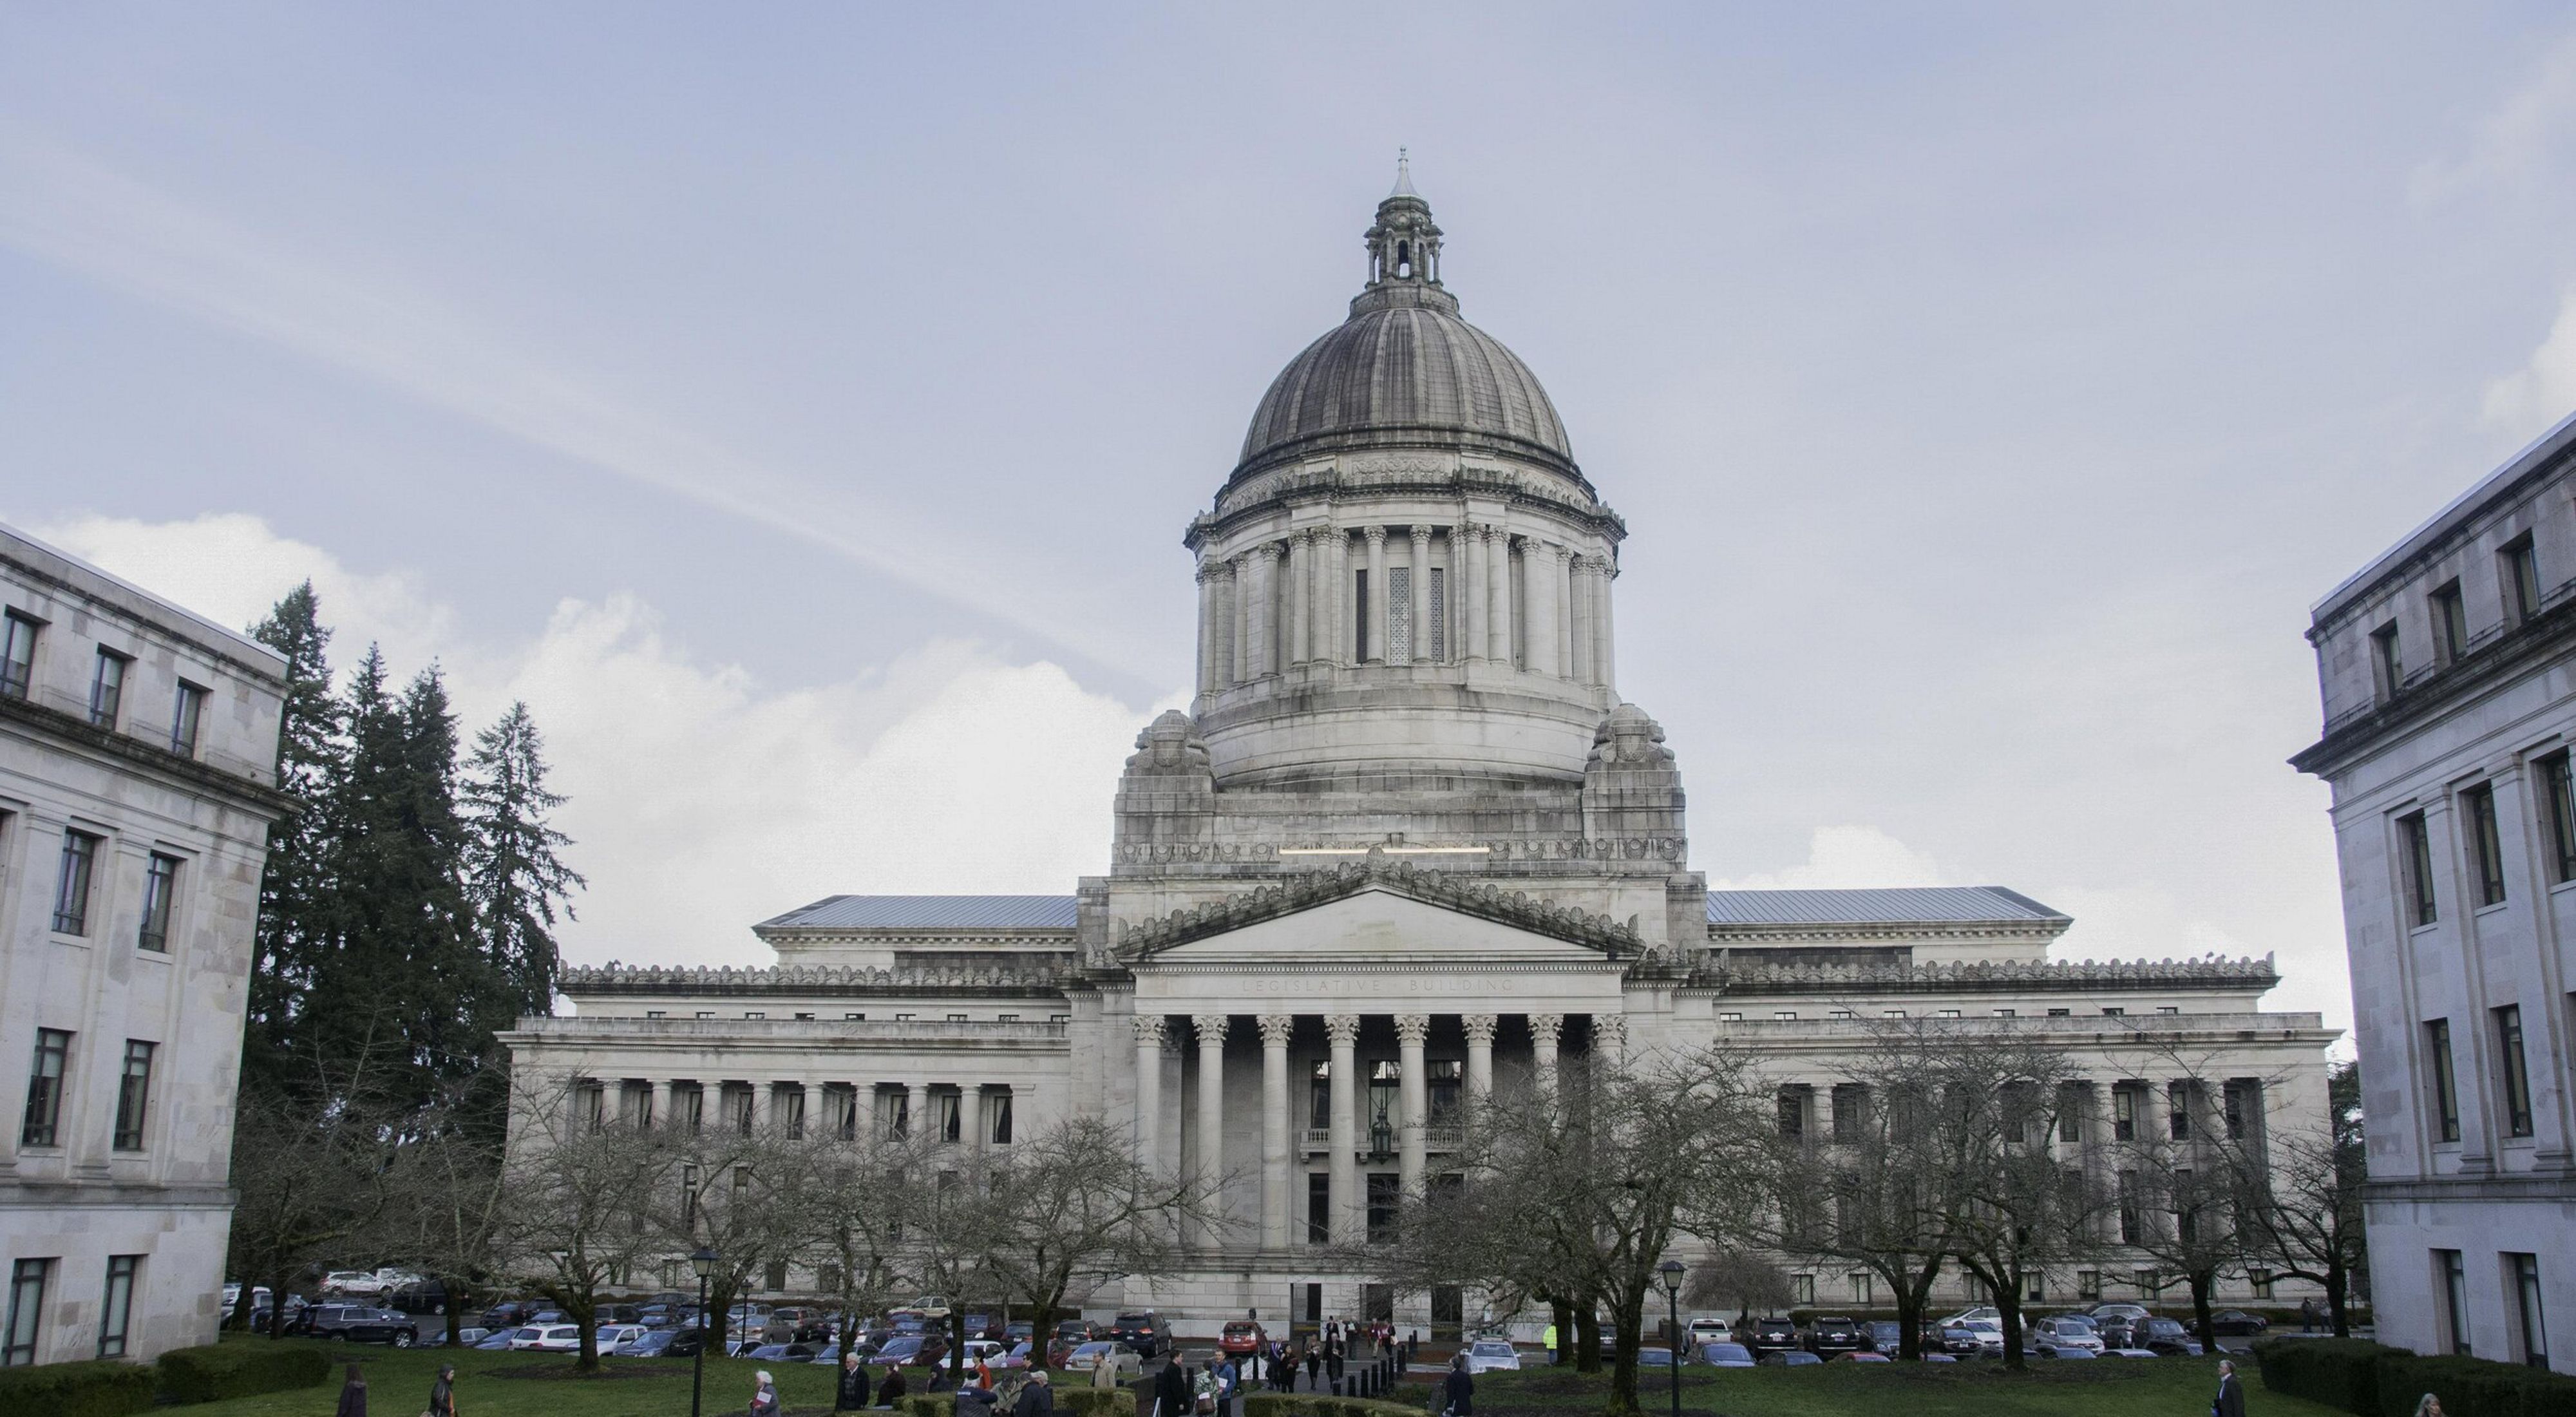 View of the Washington State Capitol building and the lawn in front of it.